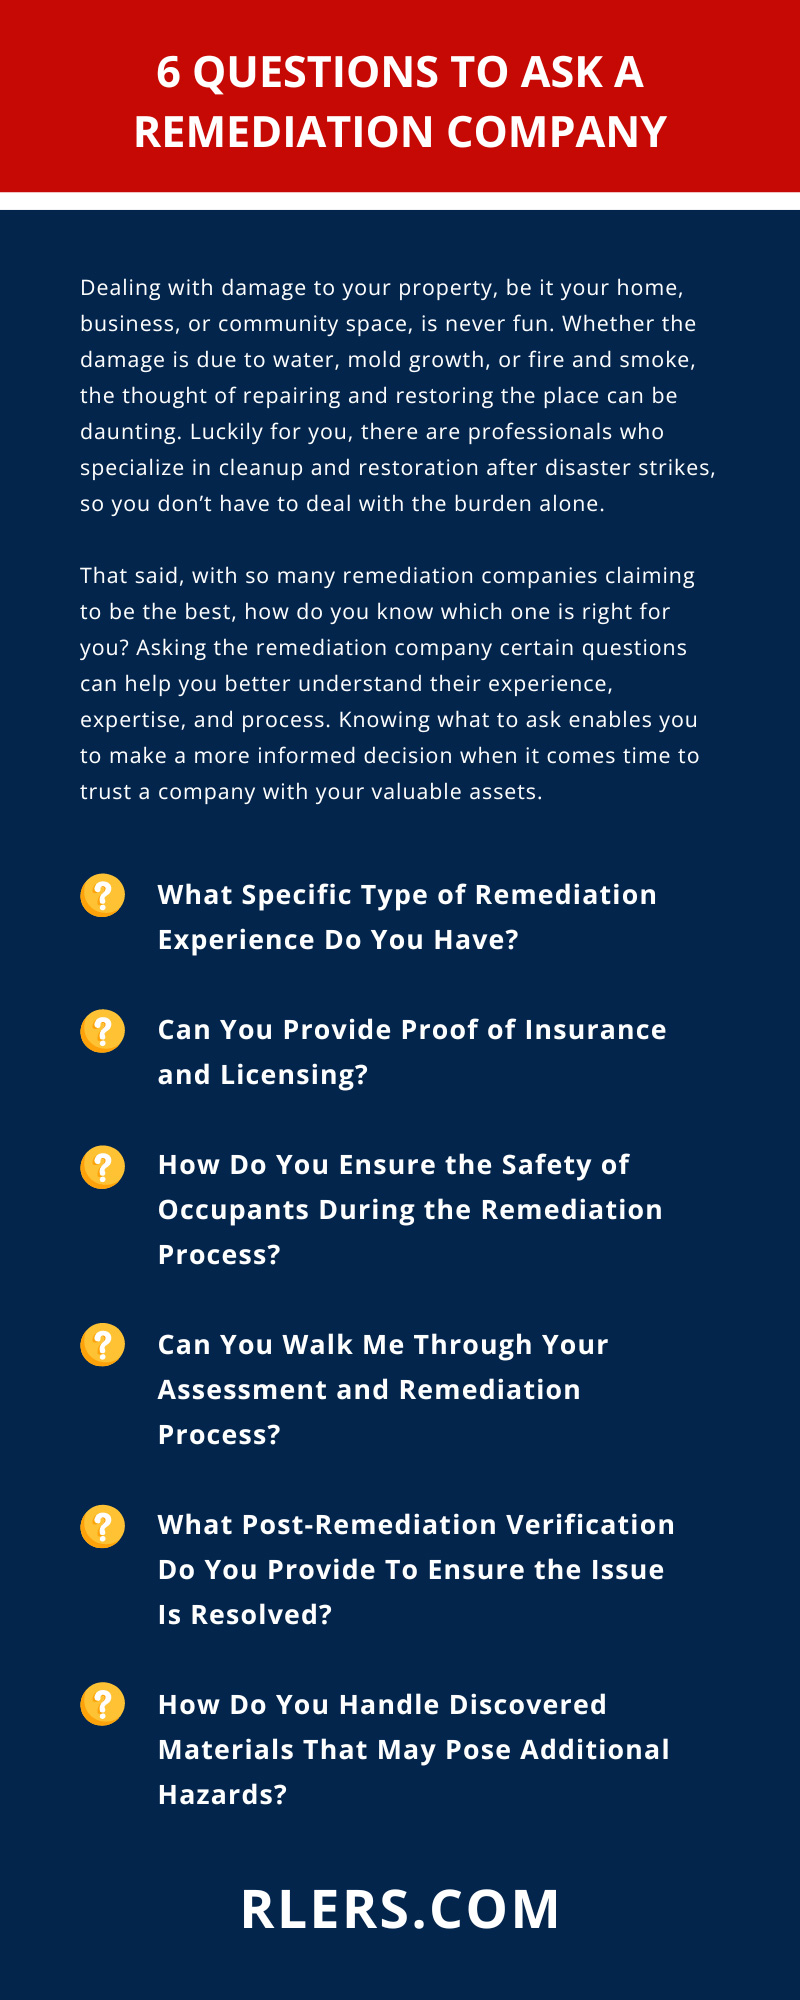 6 Questions To Ask a Remediation Company